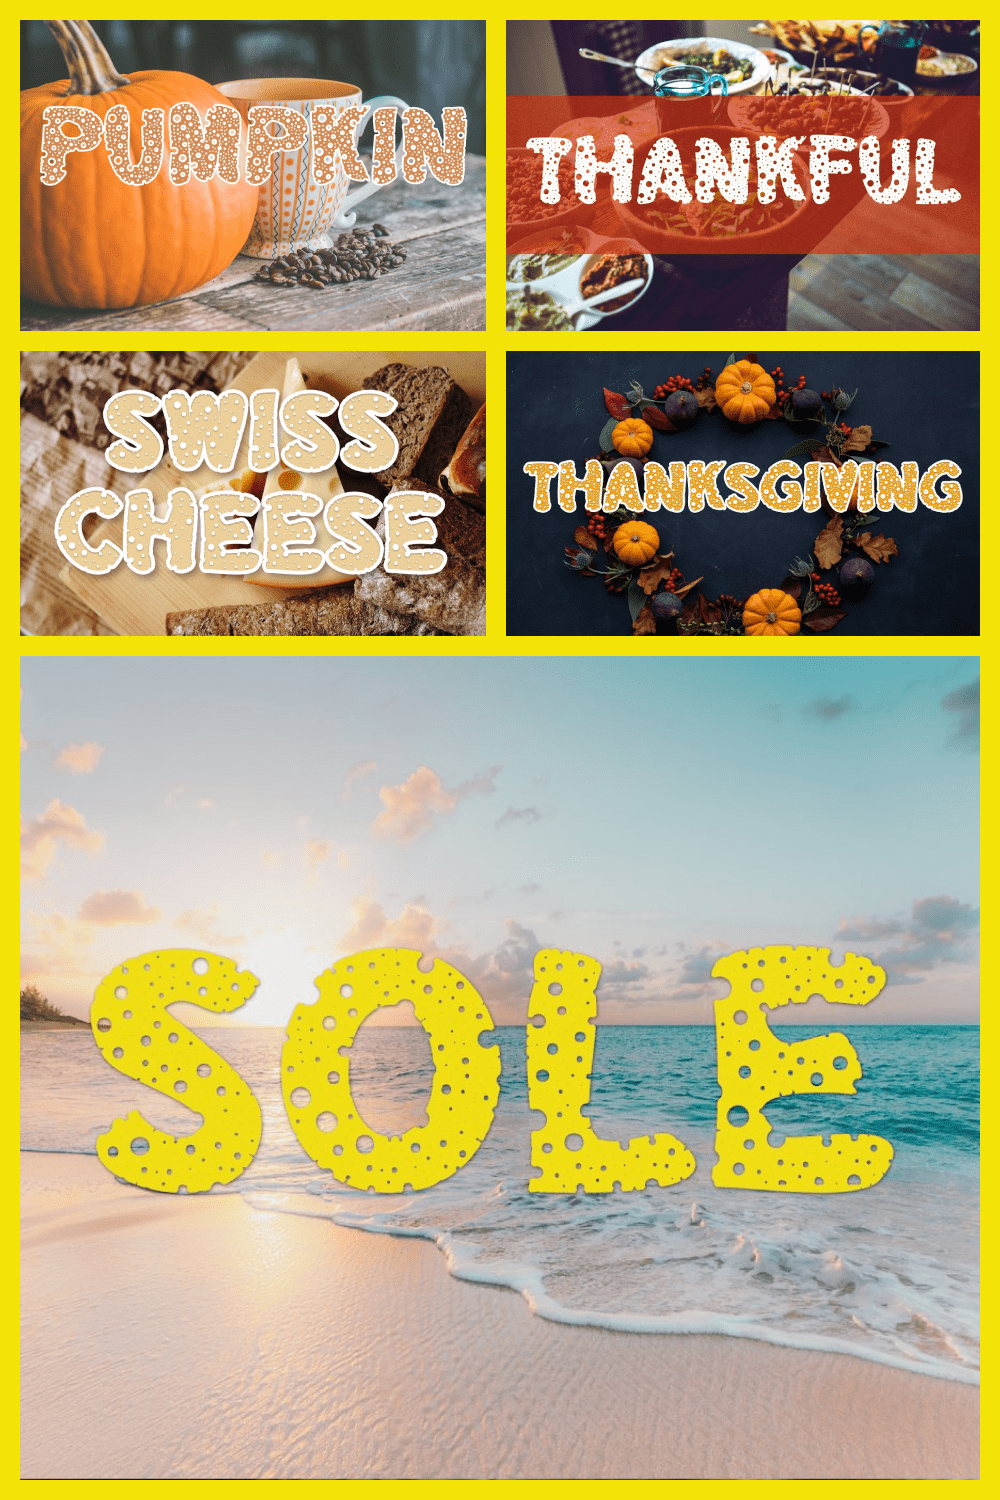 Swiss Cheese - Thanksgiving Font by vladocar.